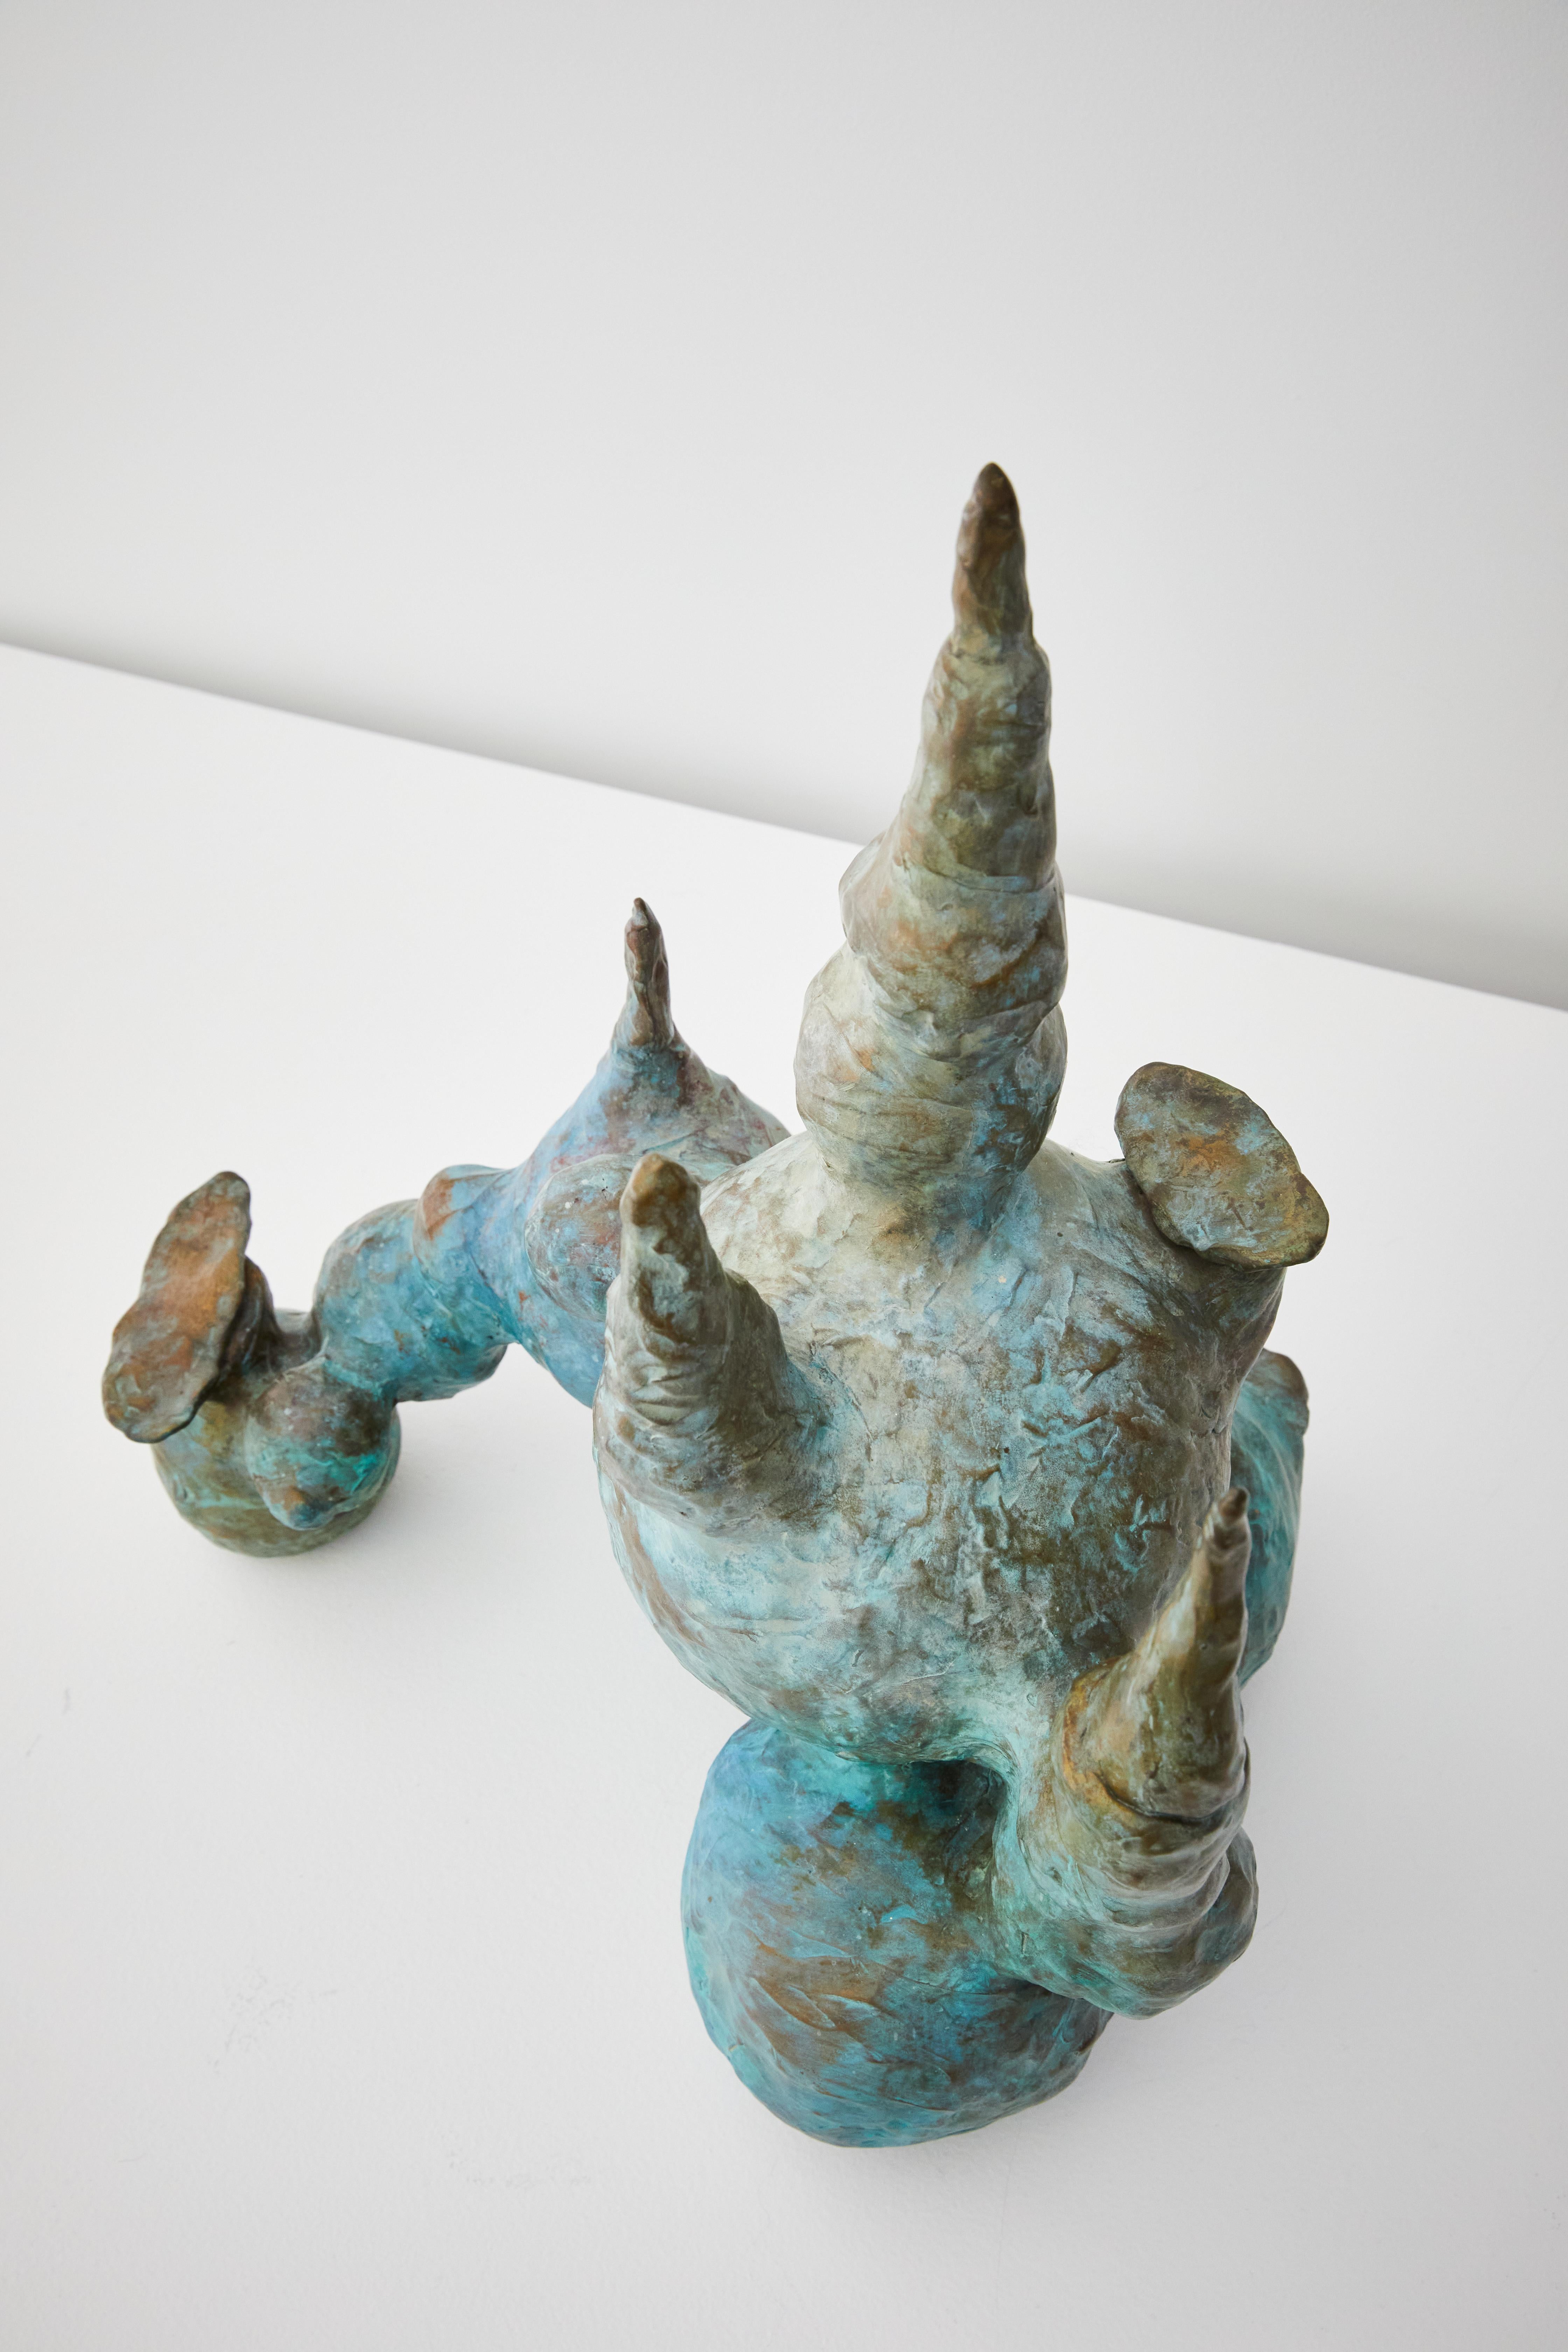 Paula Hayes
Feathers, 2020 
Cast bronze with patina

Drawing inspiration from Paracelsus's idea of “Gnomus” (earth) and various architectural structures, Hayes created her interior world where the wild plants grow through the seasons.